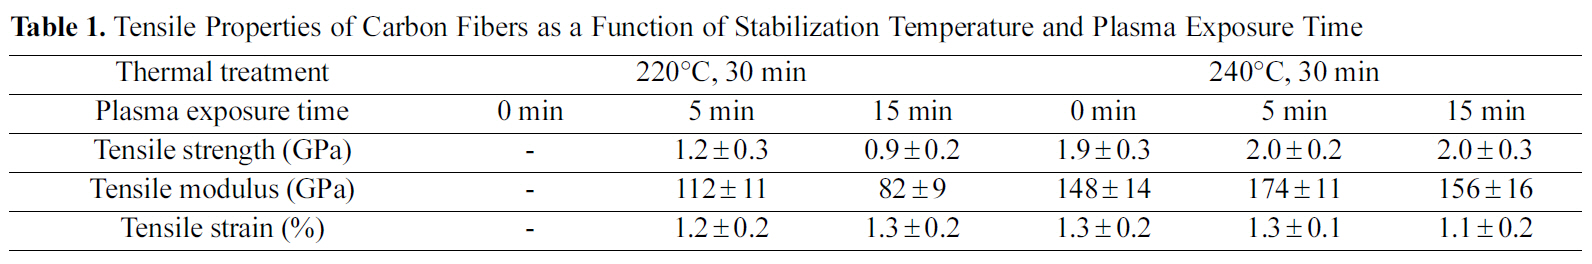 Tensile Properties of Carbon Fibers as a Function of Stabilization Temperature and Plasma Exposure Time